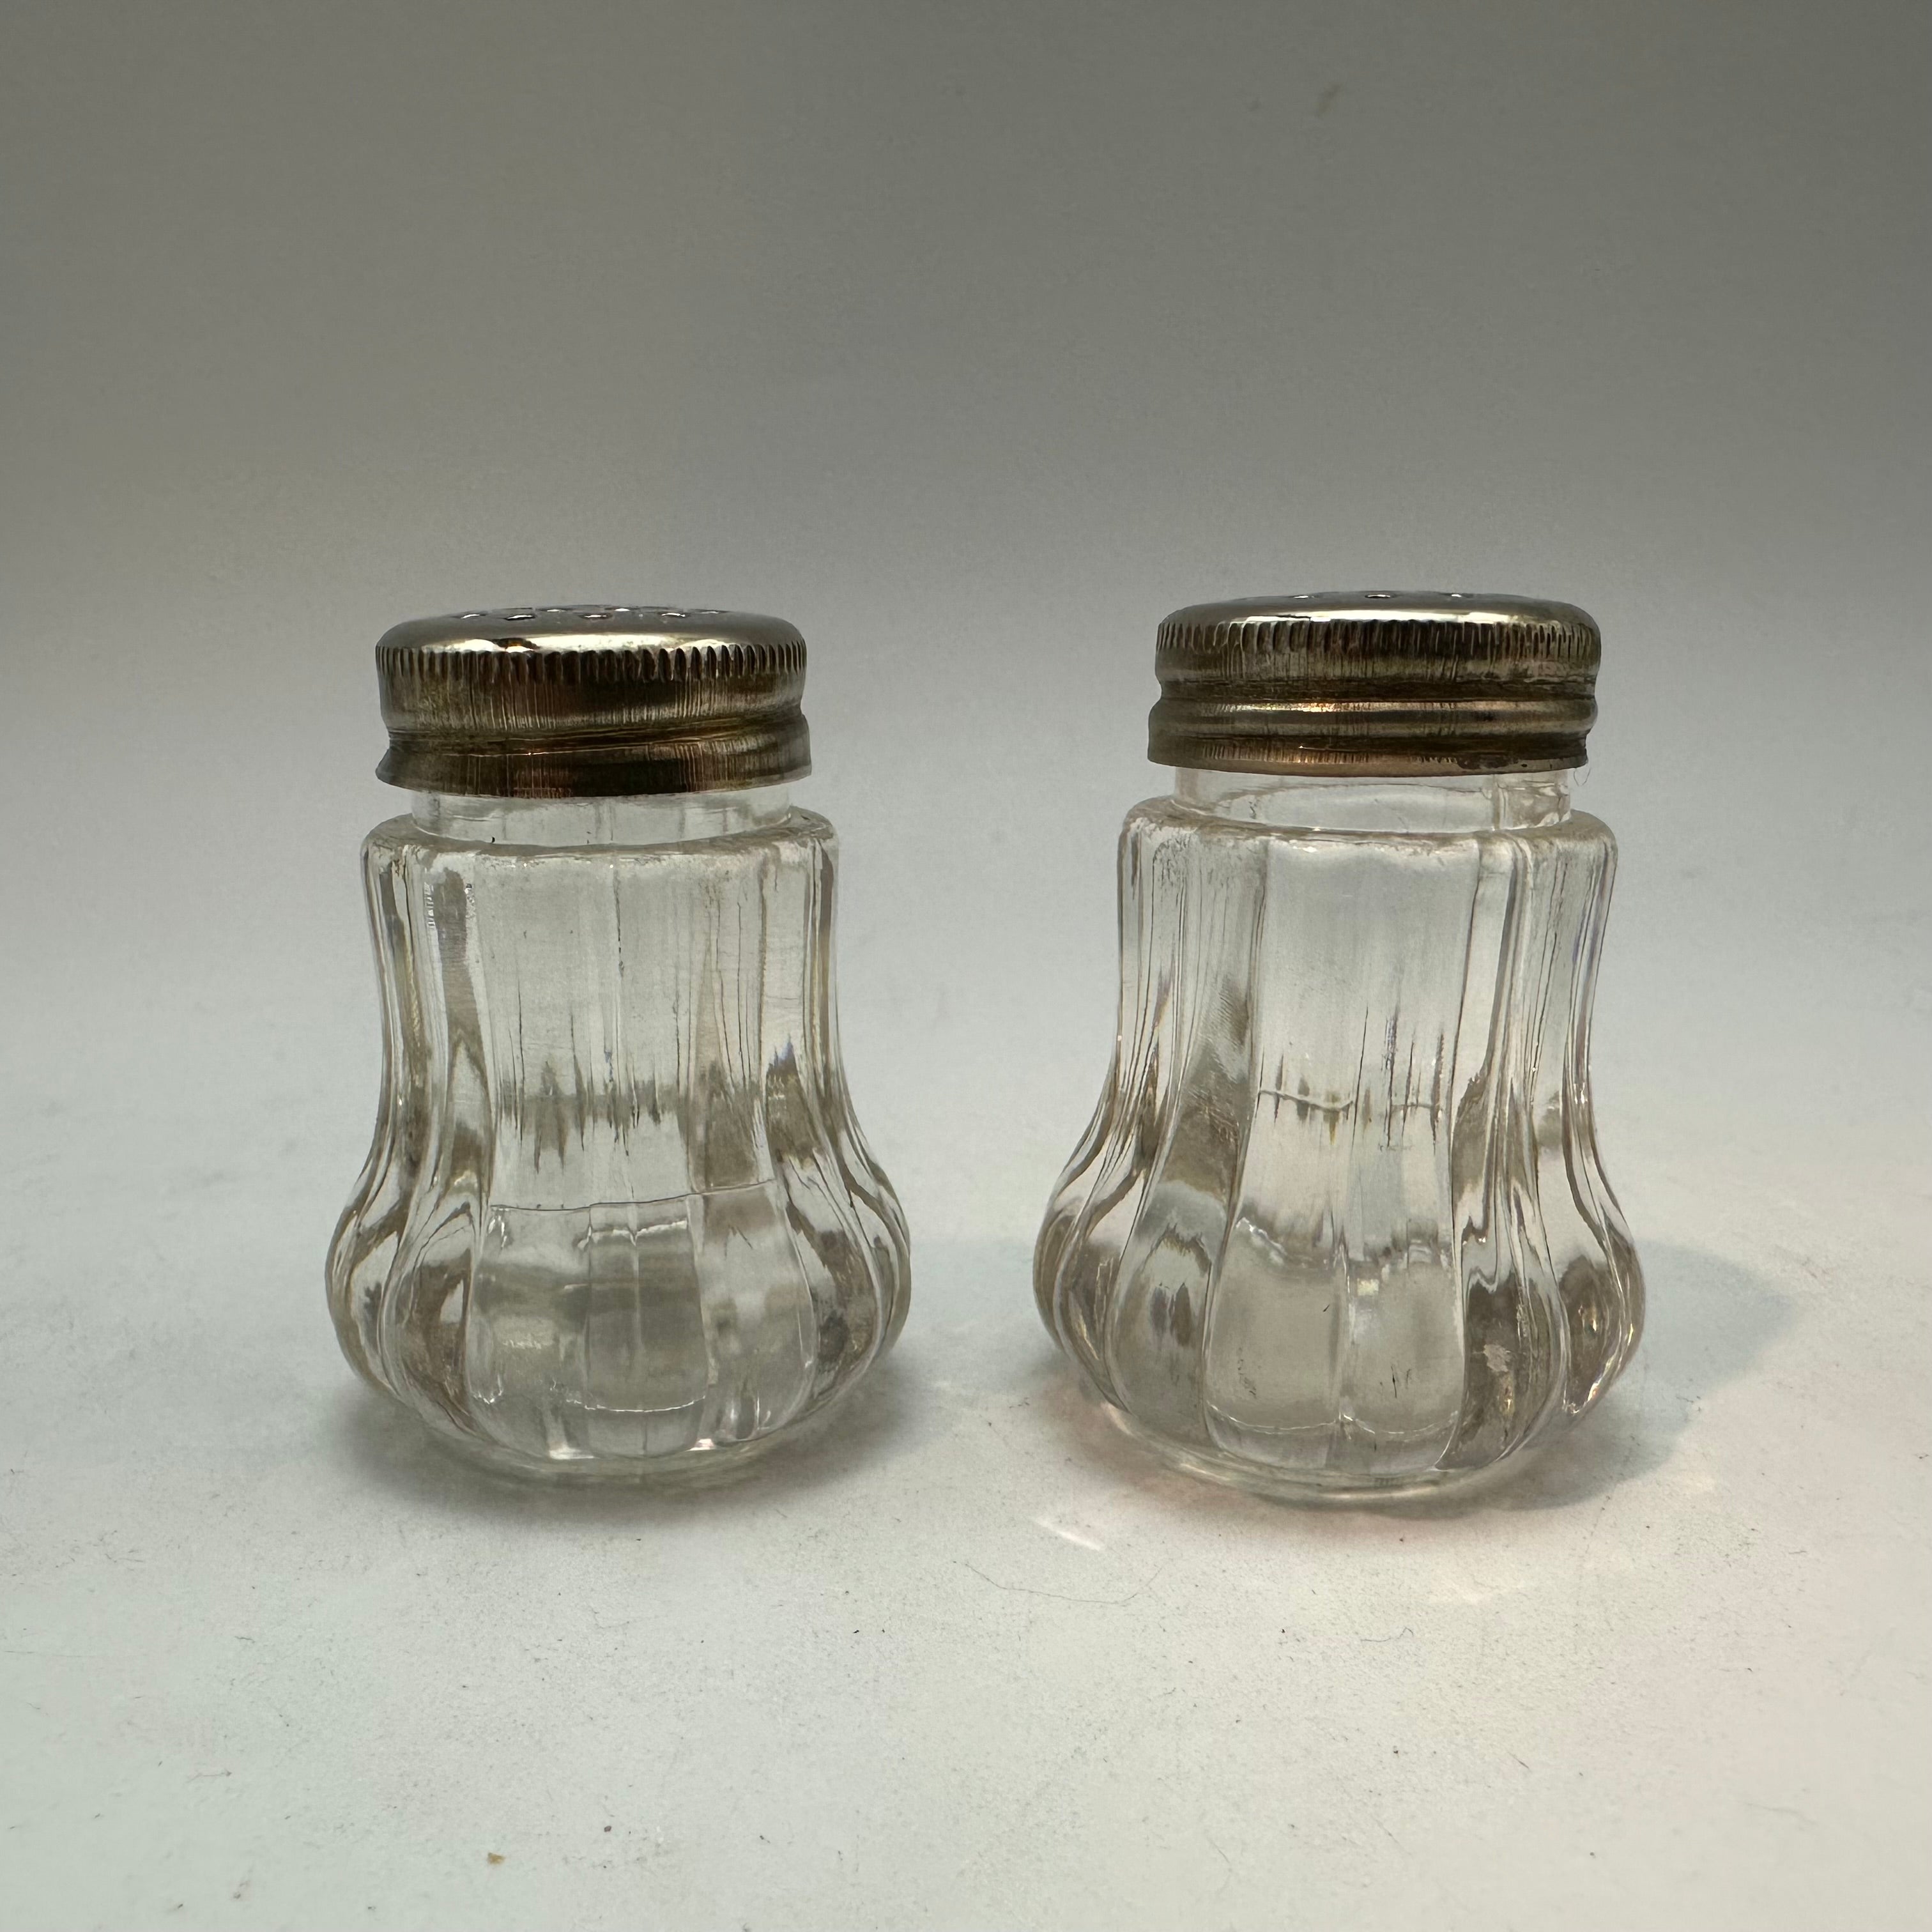 Small Clear Plastic Salt & Pepper Shakers With Metal Tops